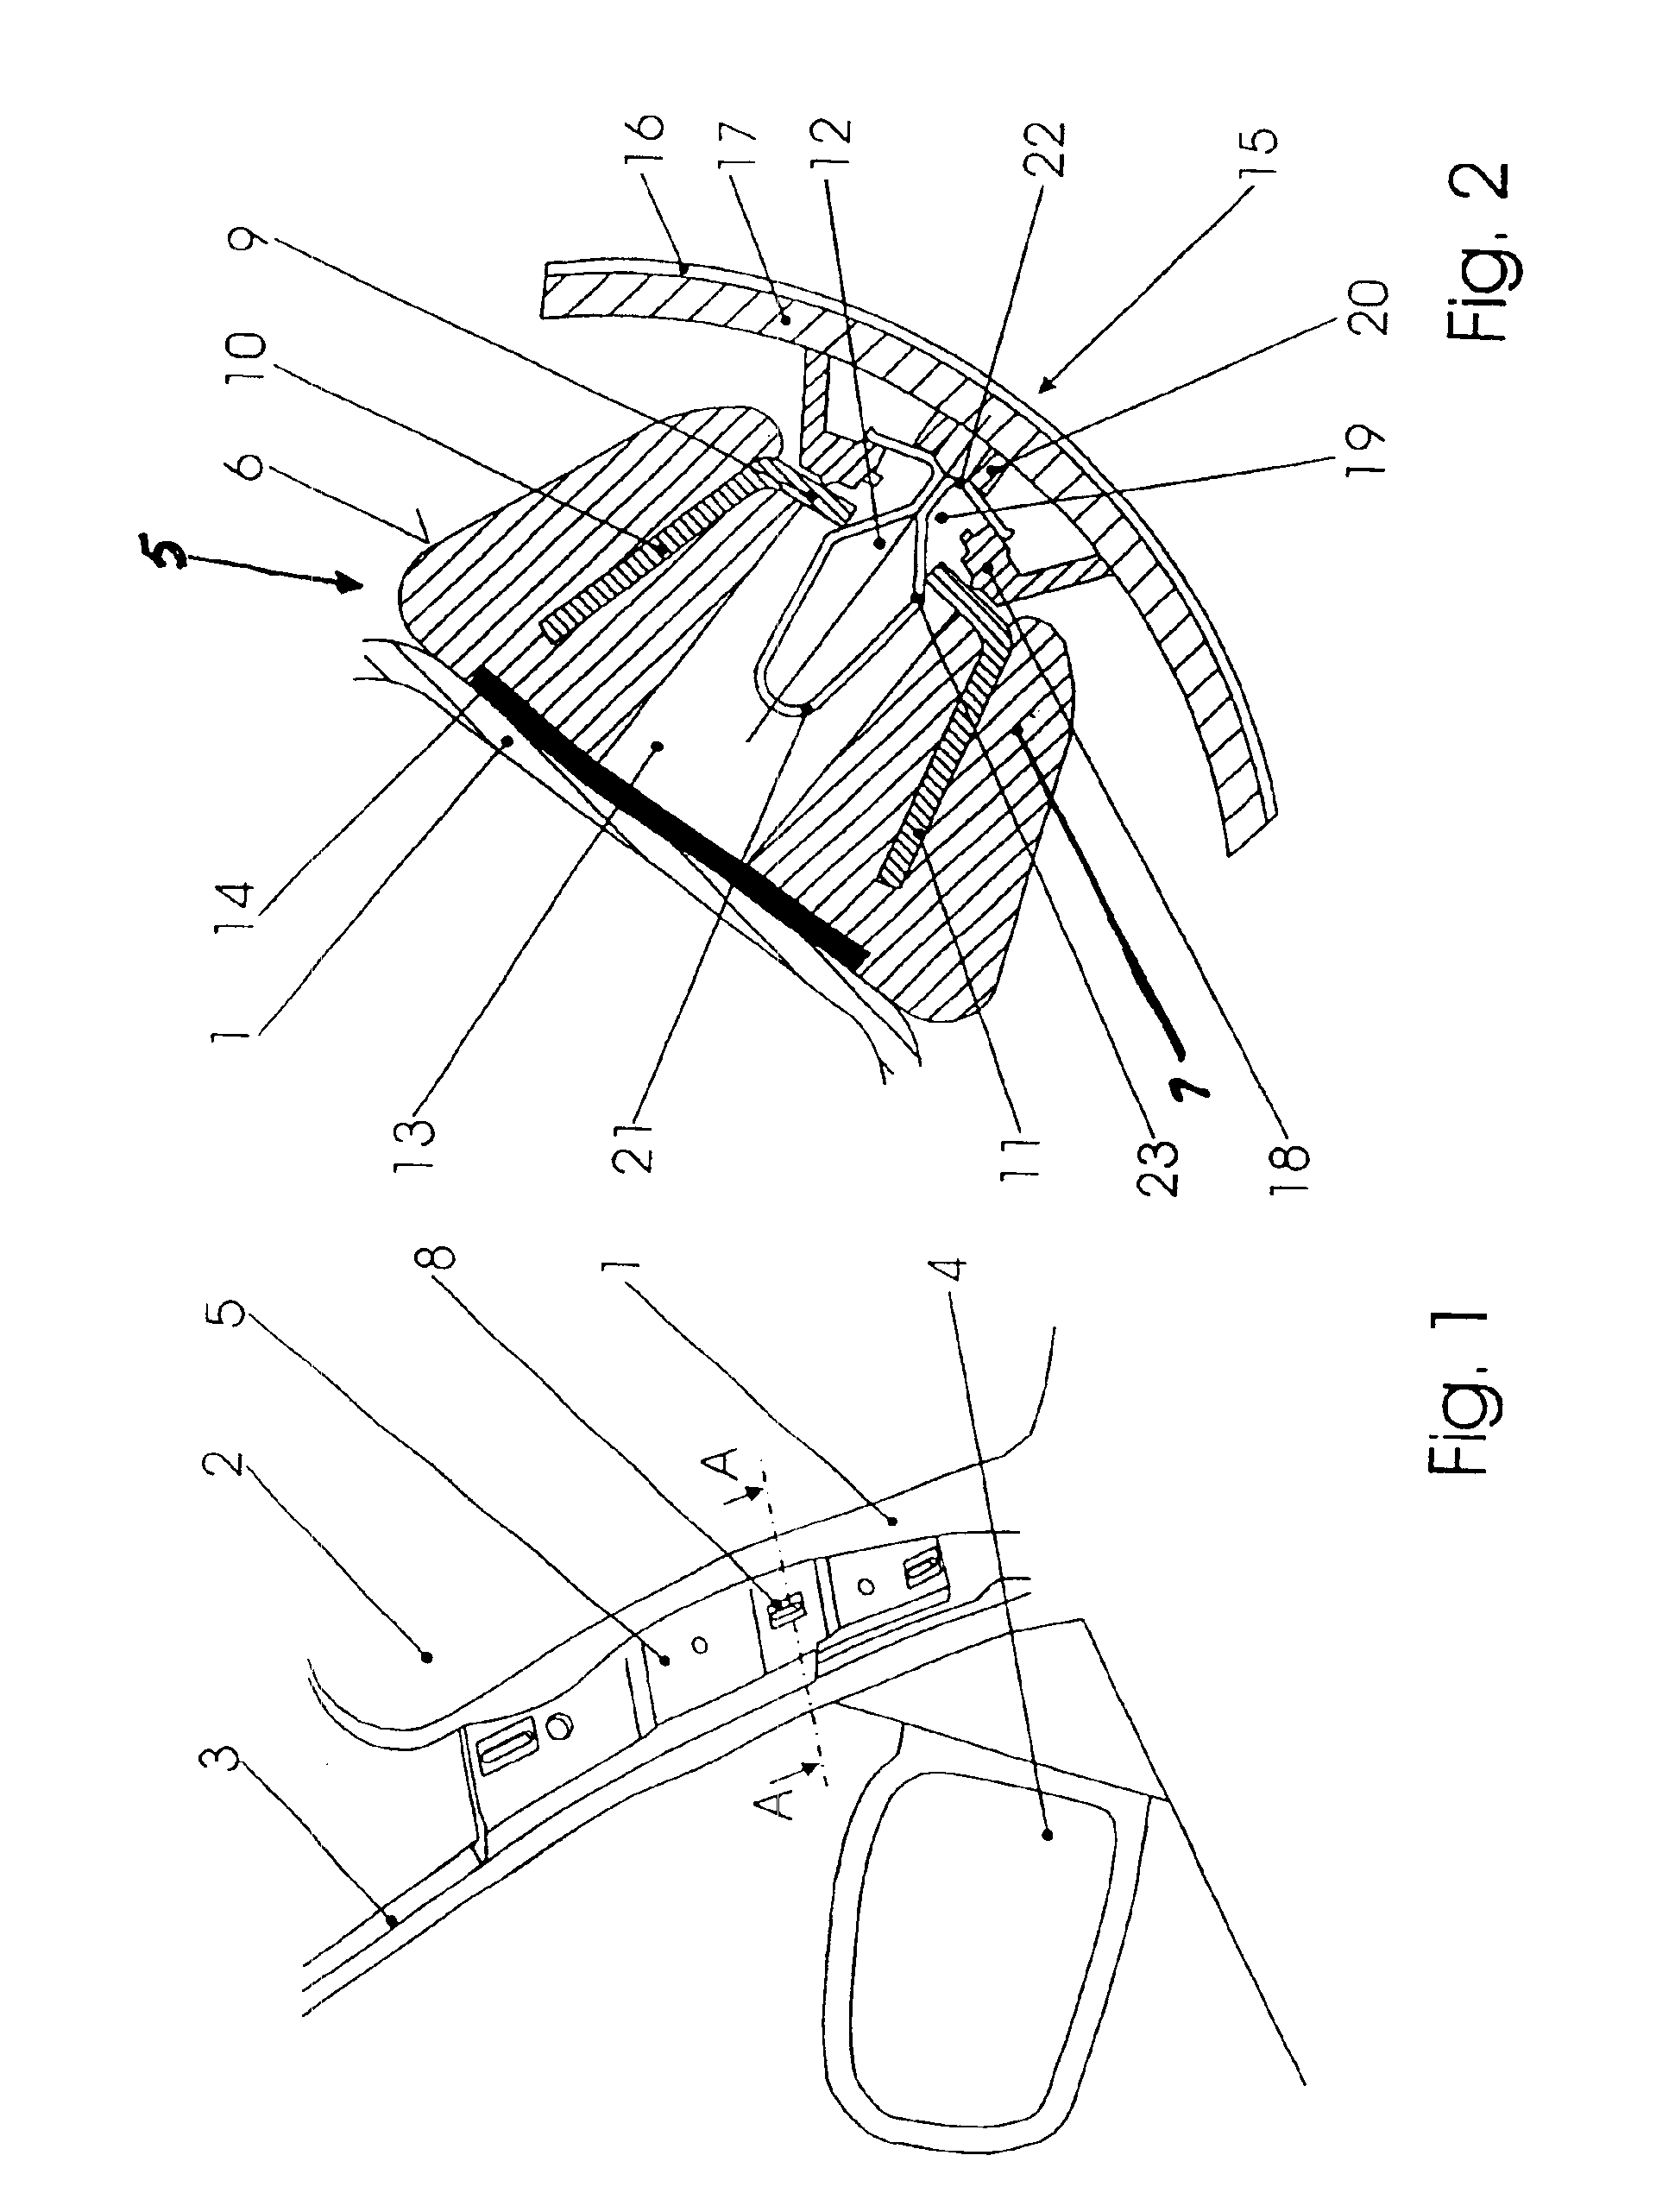 Fastening element for part of a trim inside a motor vehicle